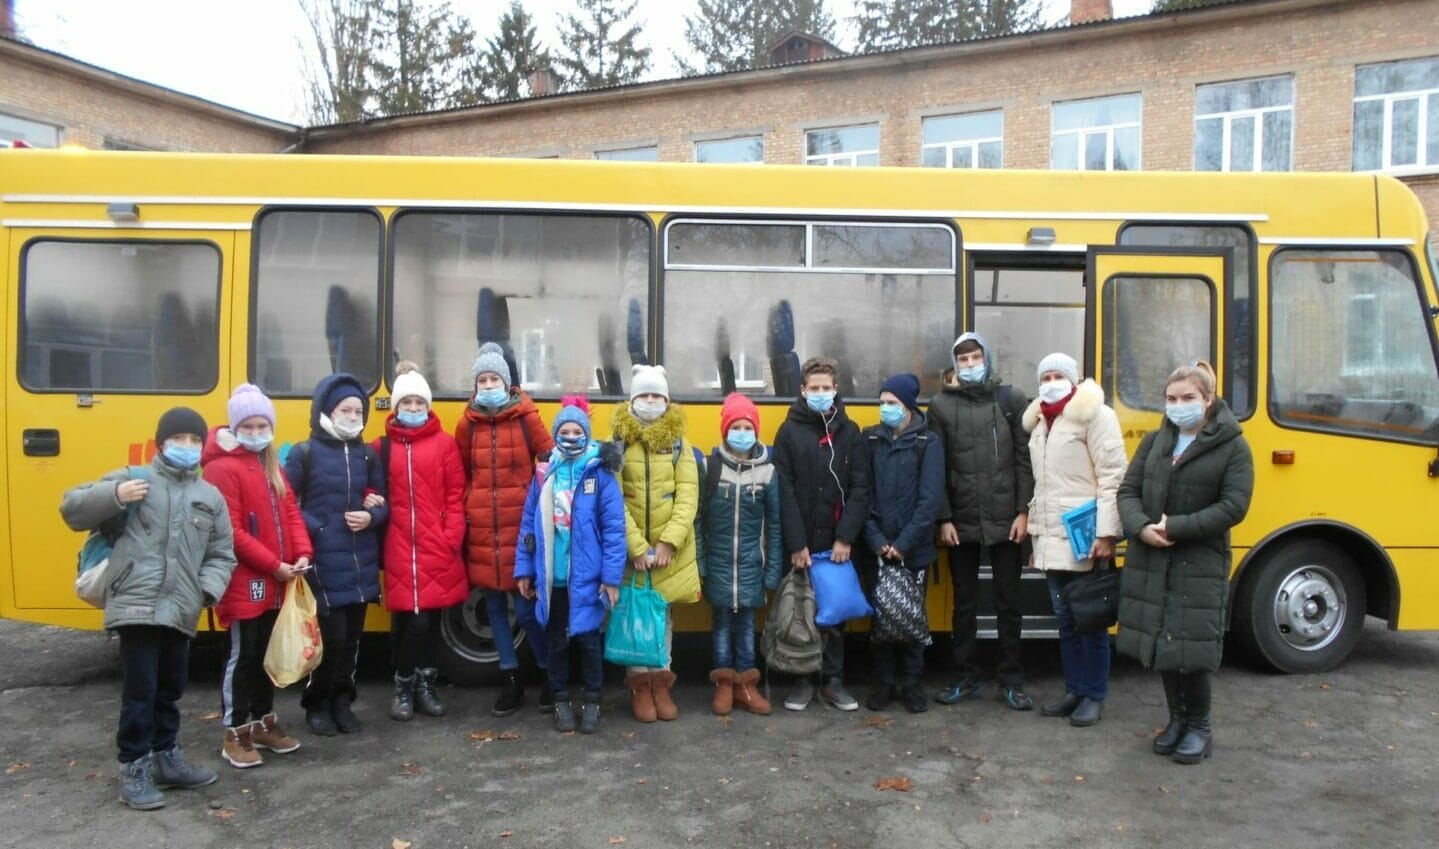 A new bus taking students and teachers to school